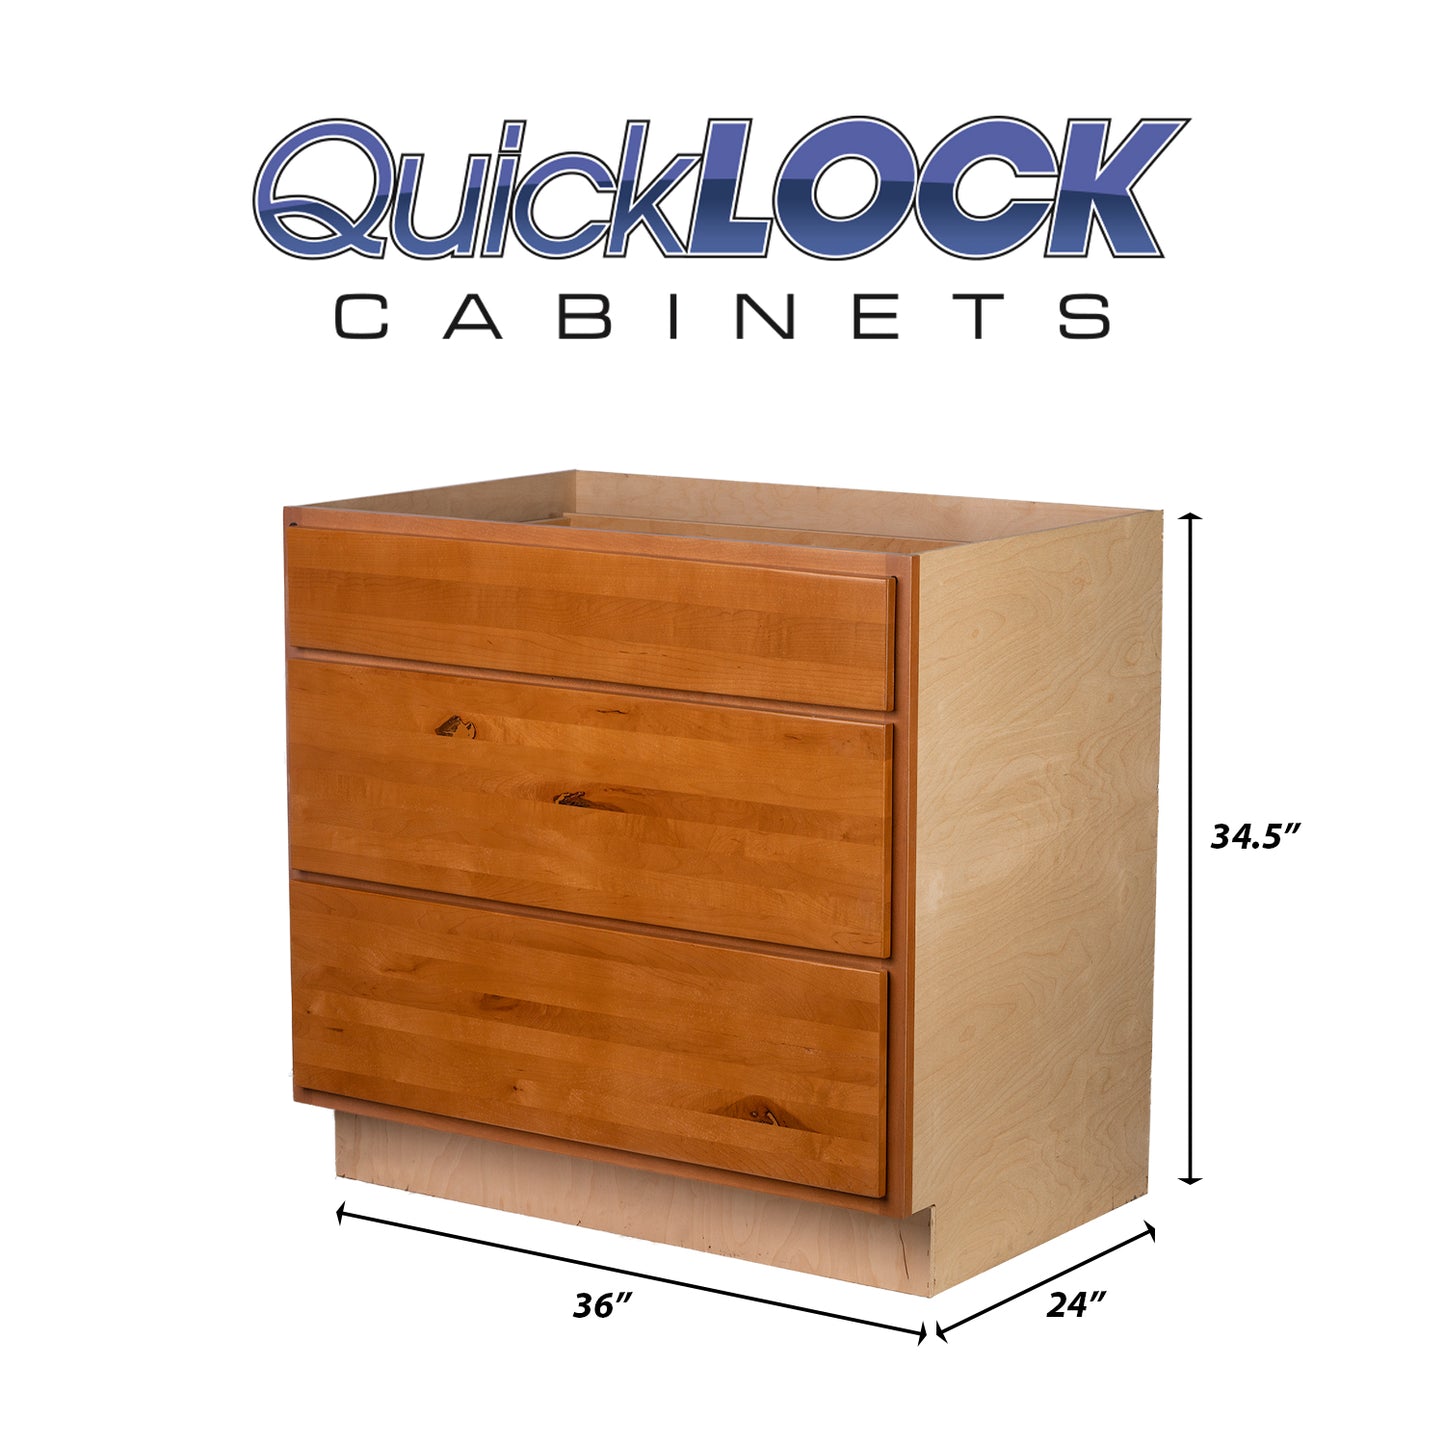 Quicklock RTA (Ready-to-Assemble) Provincial Stain 3 Drawer 36" Pots and Pans Base Cabinet | 36"Wx34.5"Hx24"D